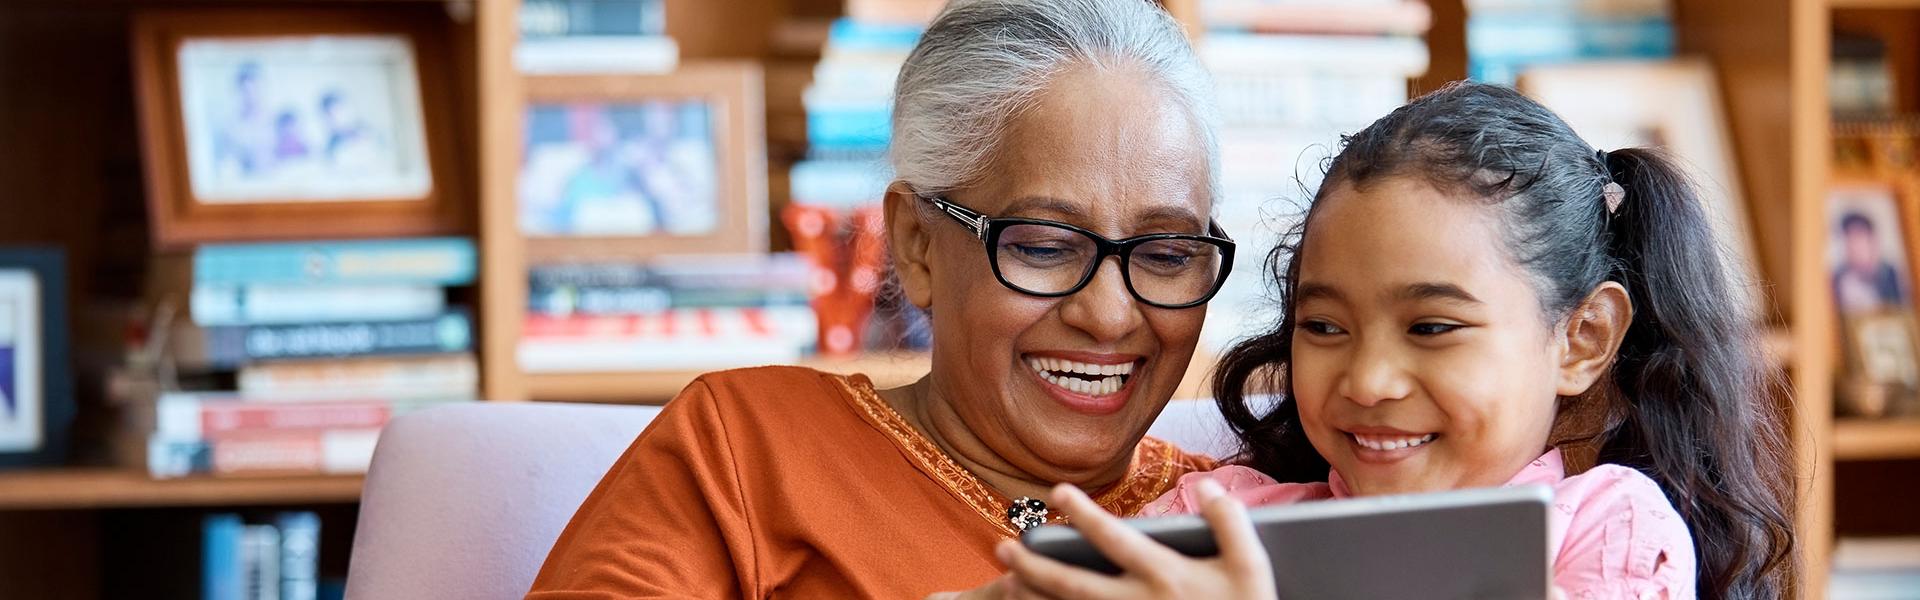 Photo of grandmother with granddaughter using a tablet